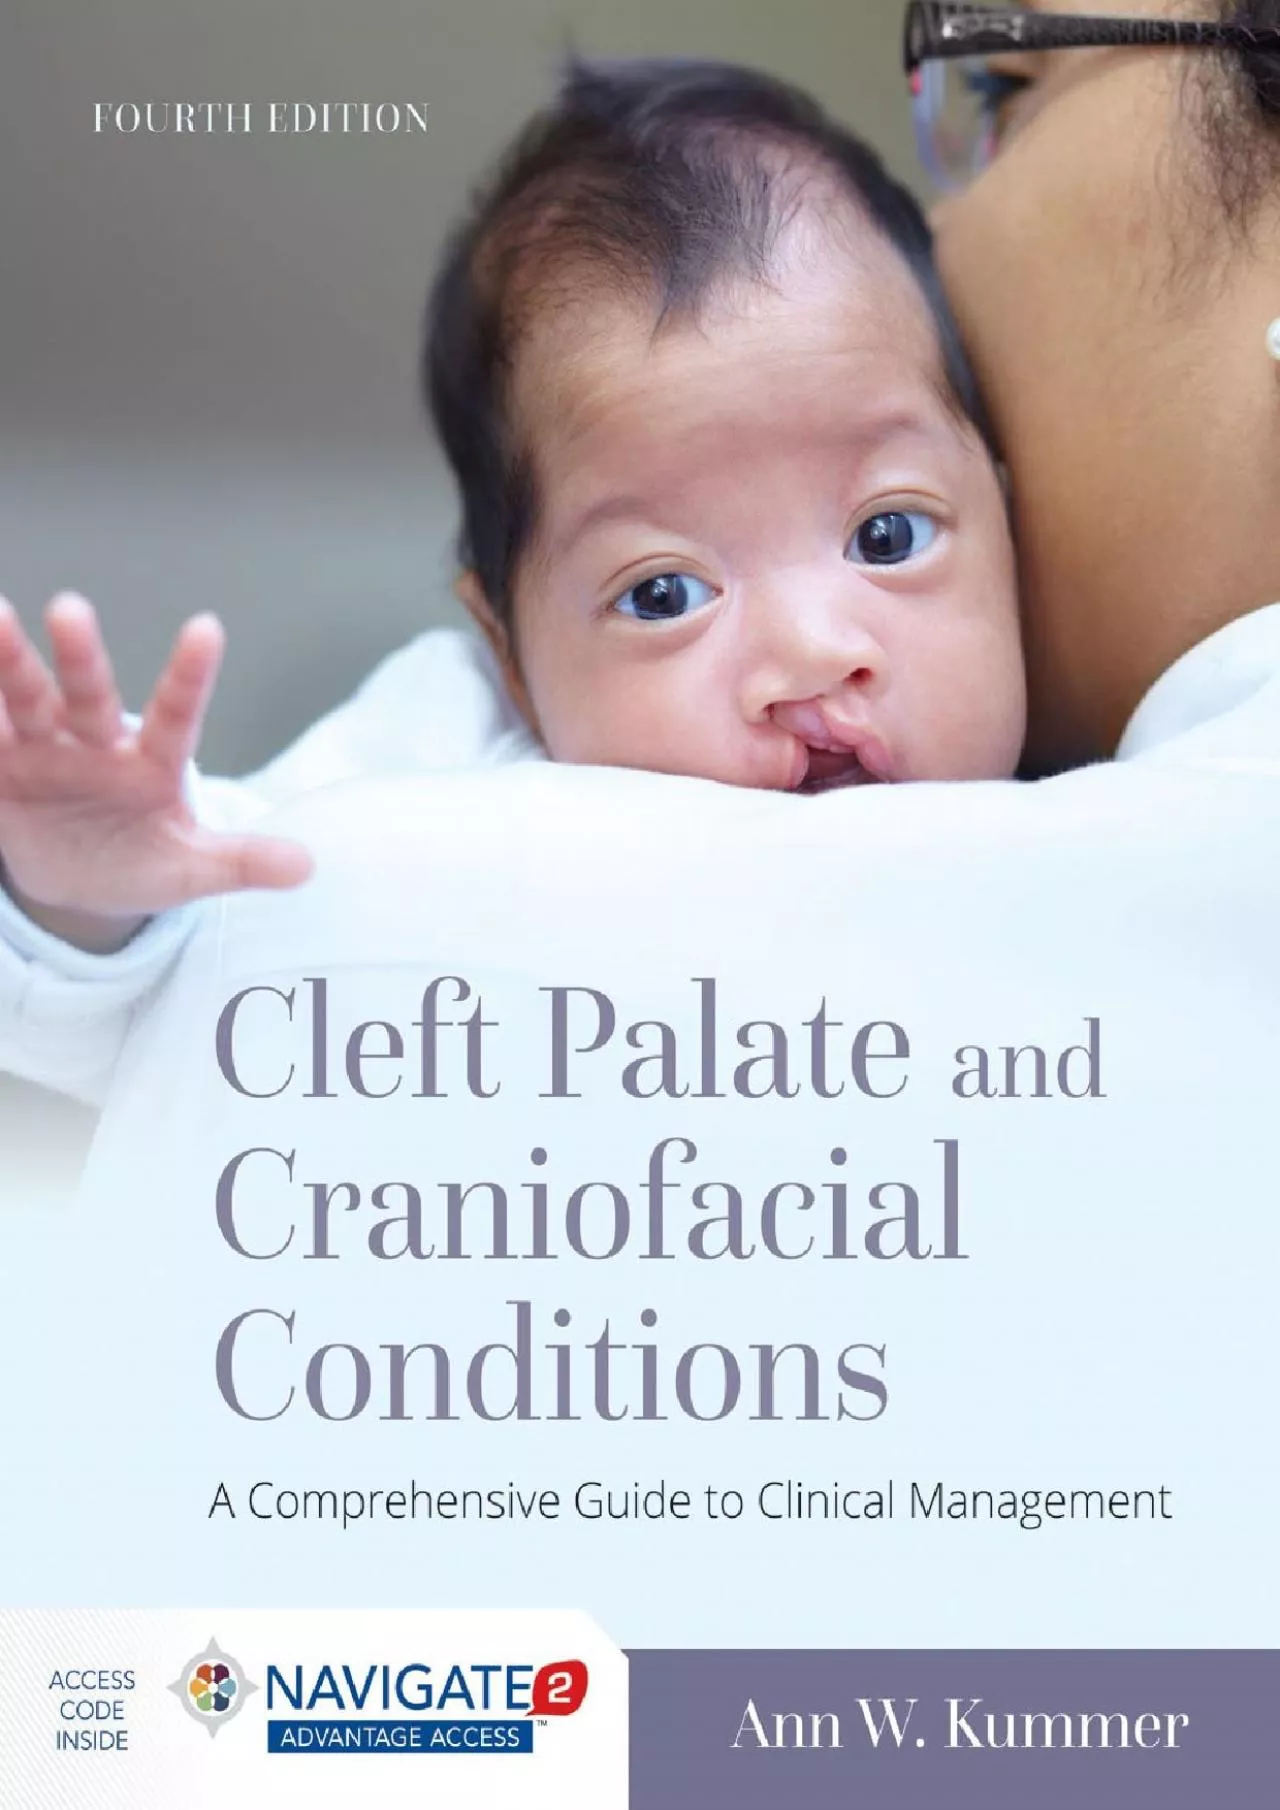 (BOOS)-Cleft Palate and Craniofacial Conditions: A Comprehensive Guide to Clinical Management: